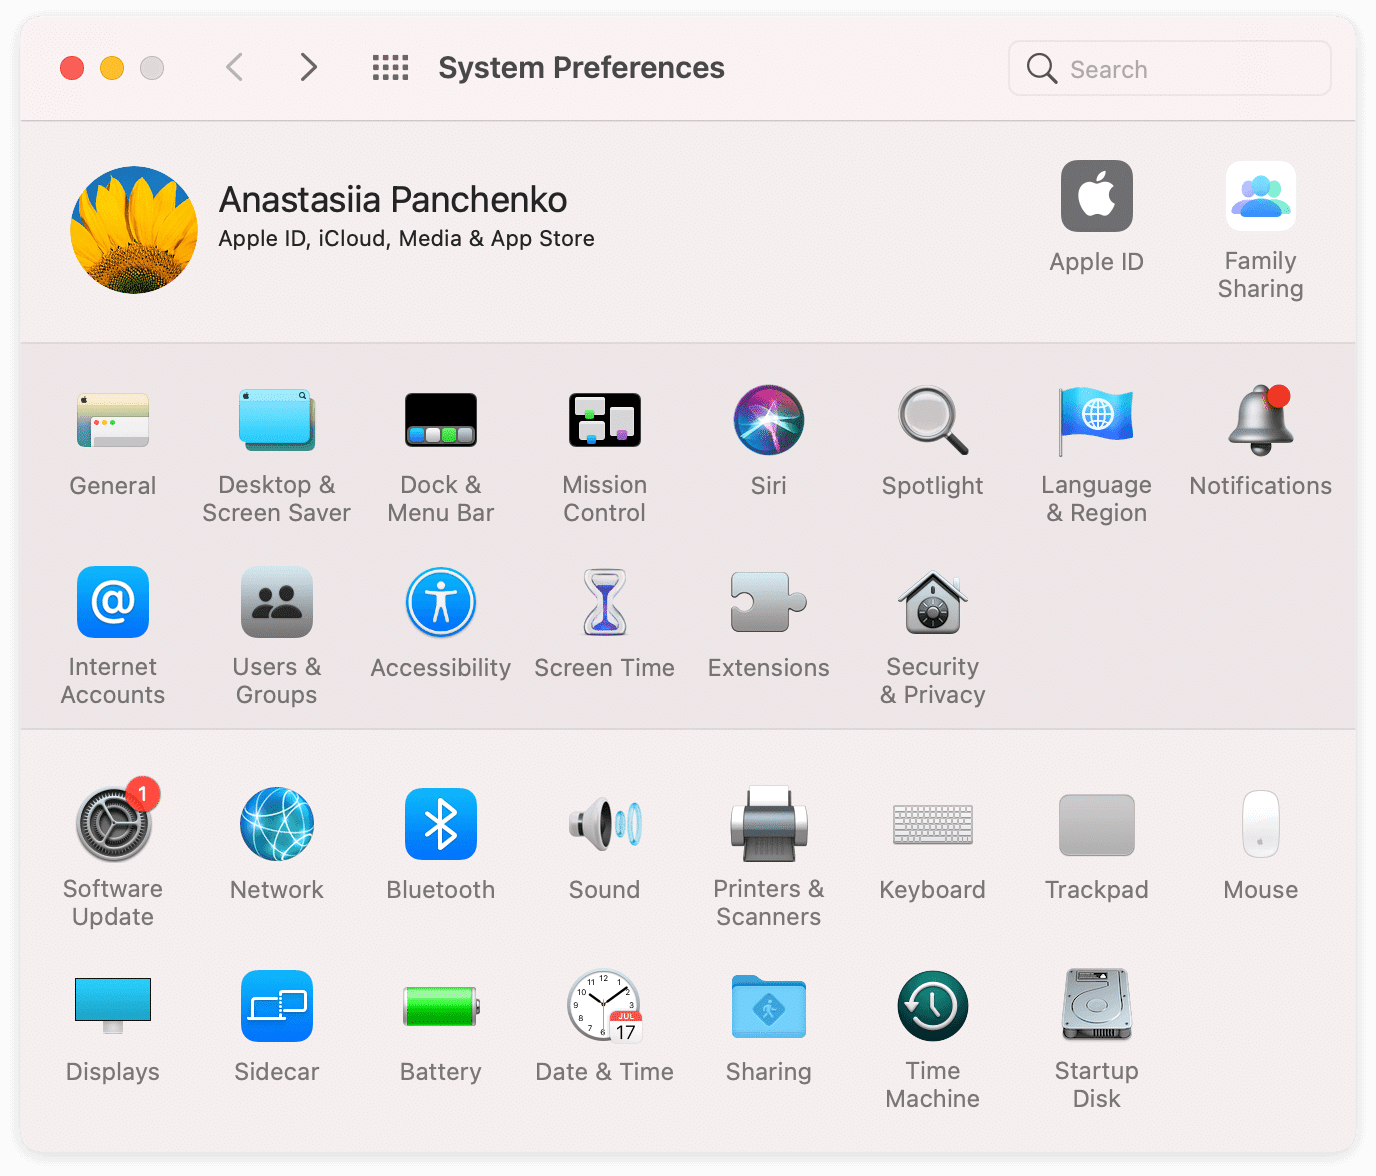 The System preferences window